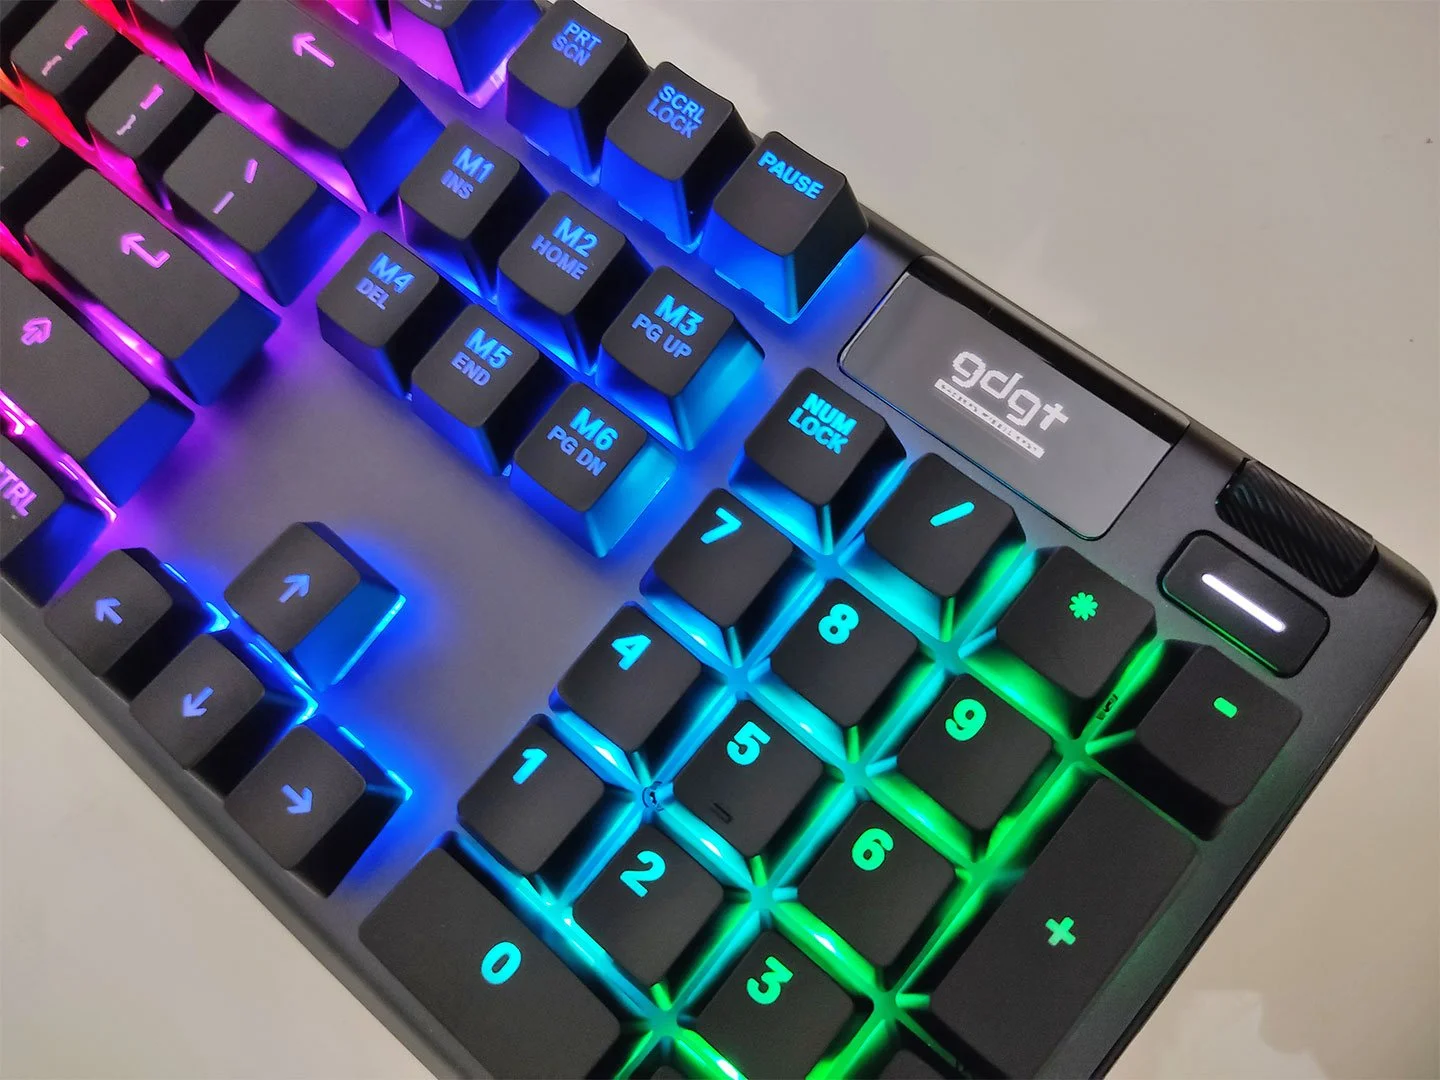 Steelseries Apex 5 Hybrid Mechanical Keyboard Review Gadgets Middle East